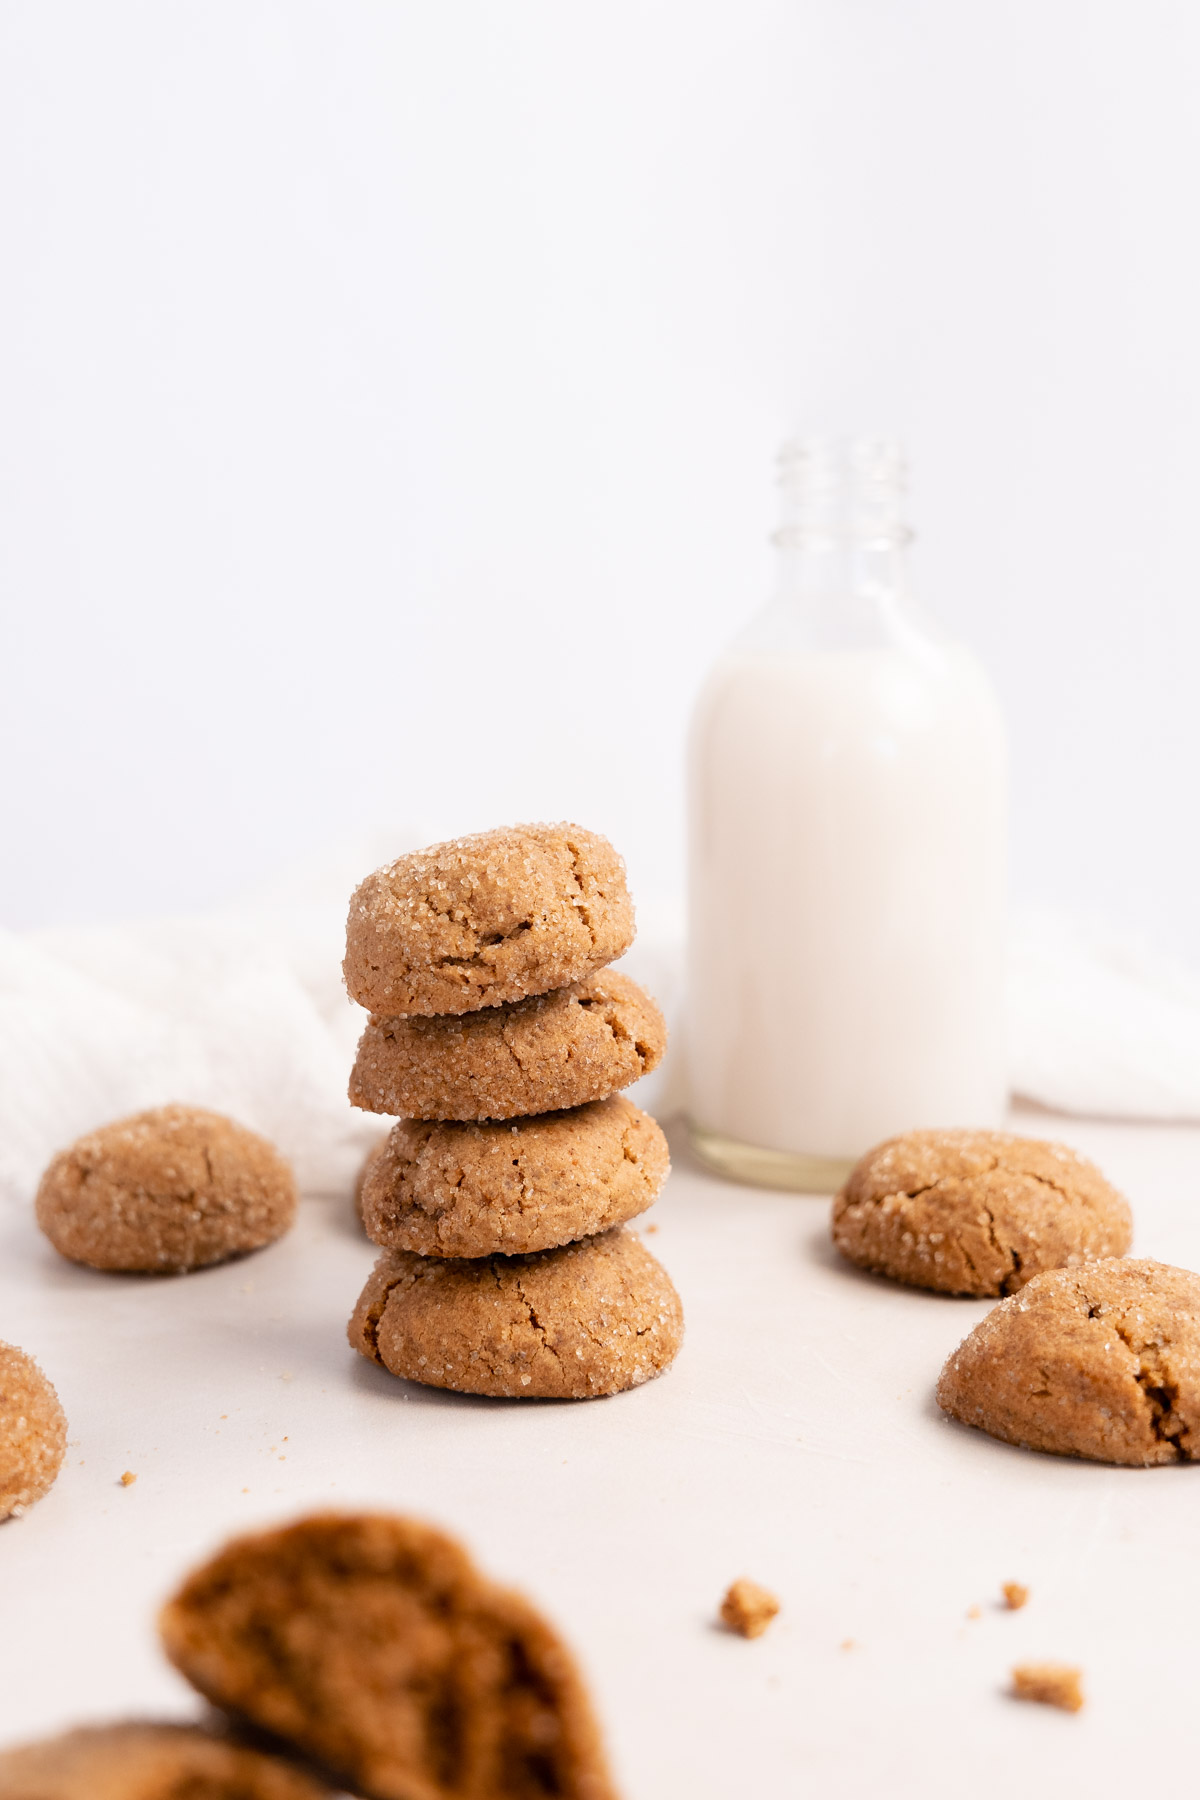 four ginger biscuits stacked on top of each other with a bottle milk on the side